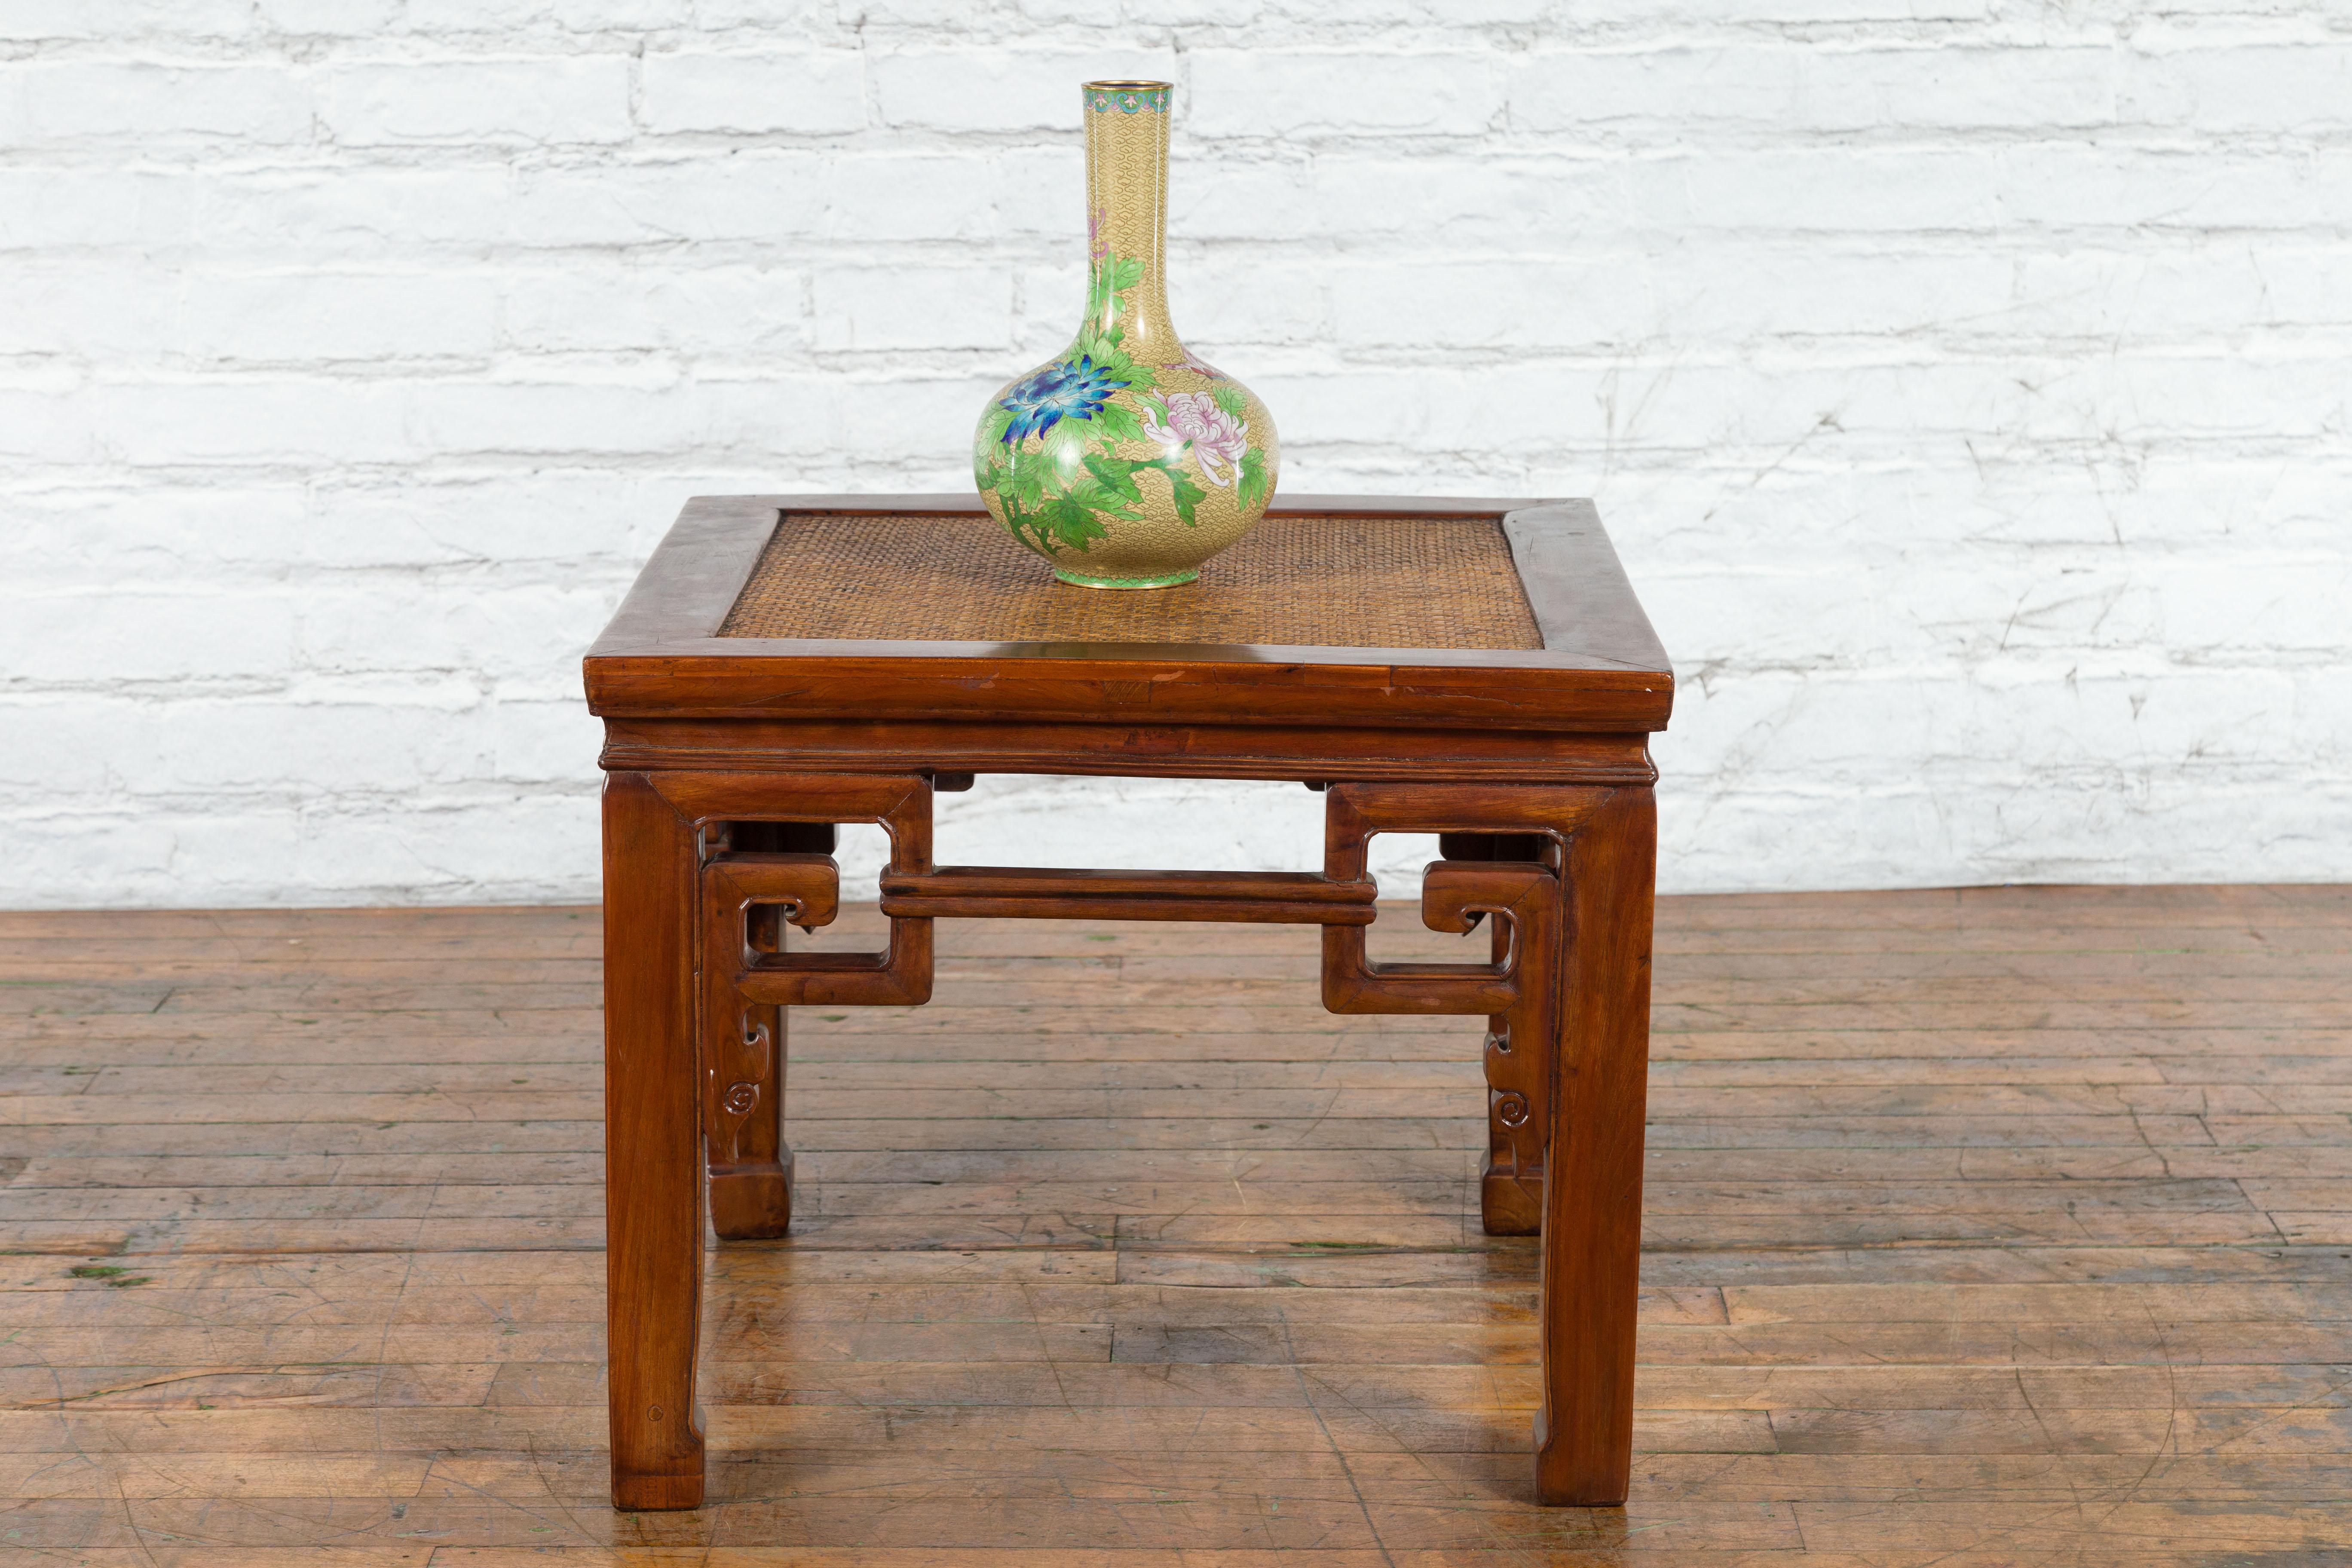 Carved Chinese Qing Dynasty 19th Century Stool or Drinks Table with Woven Rattan Top For Sale